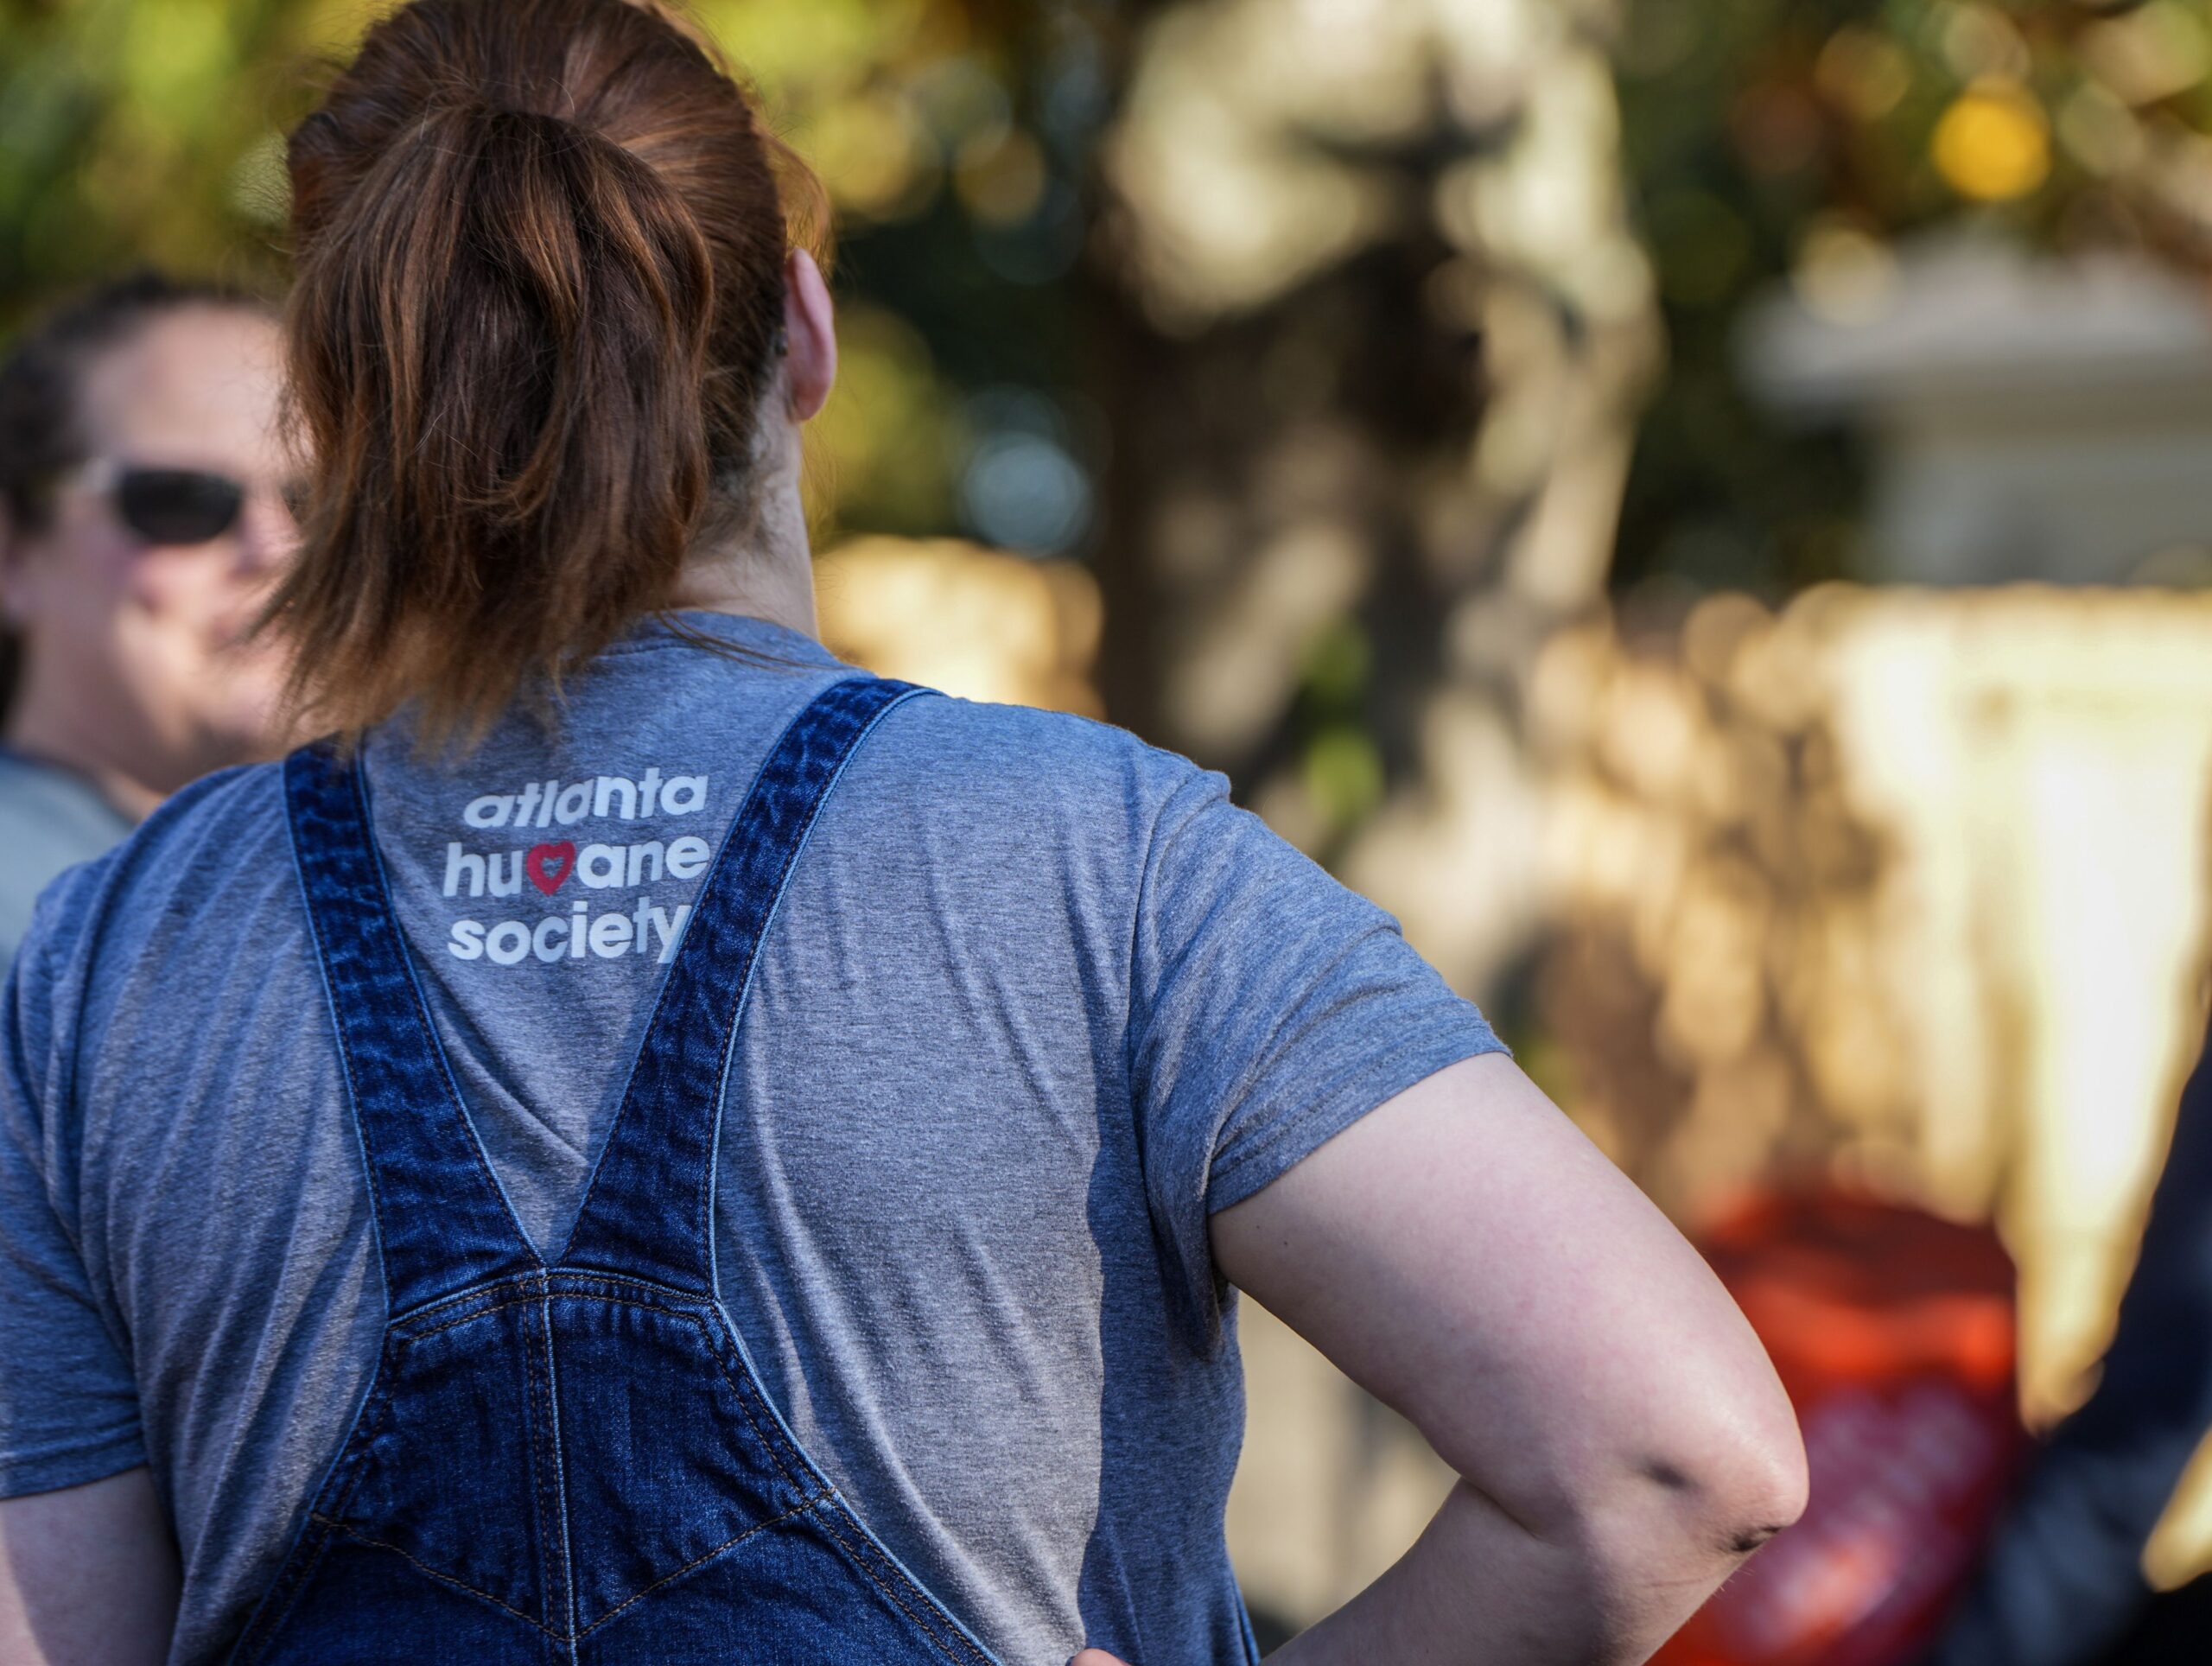 A woman stands with her back to the camera. Her shirt reads "Atlanta Humane Society".